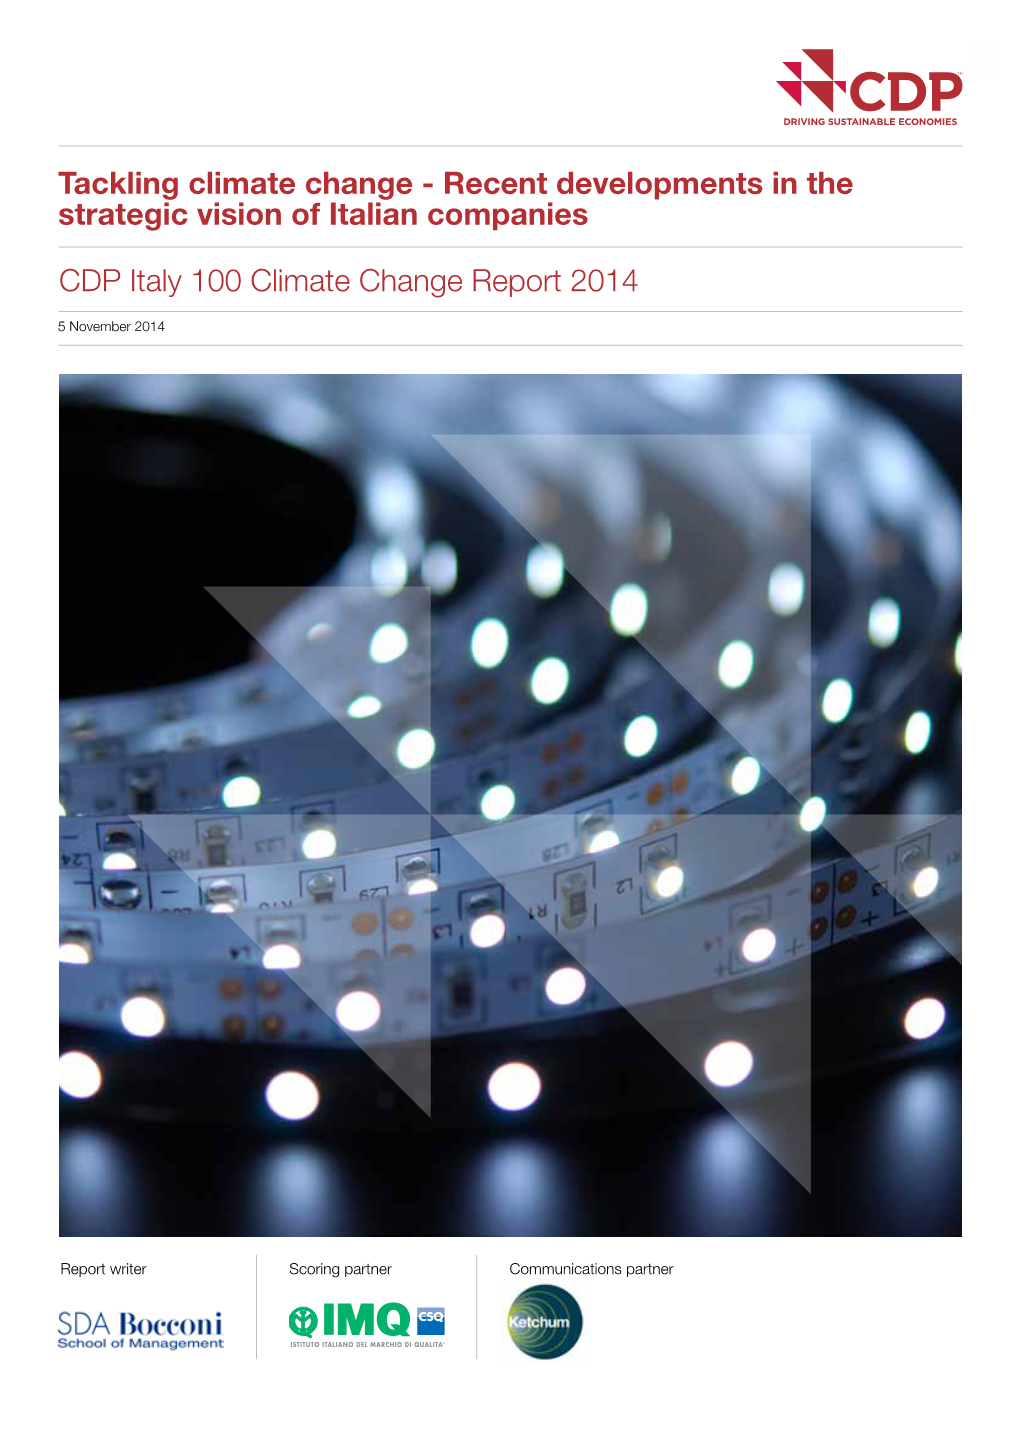 Tackling Climate Change - Recent Developments in the Strategic Vision of Italian Companies